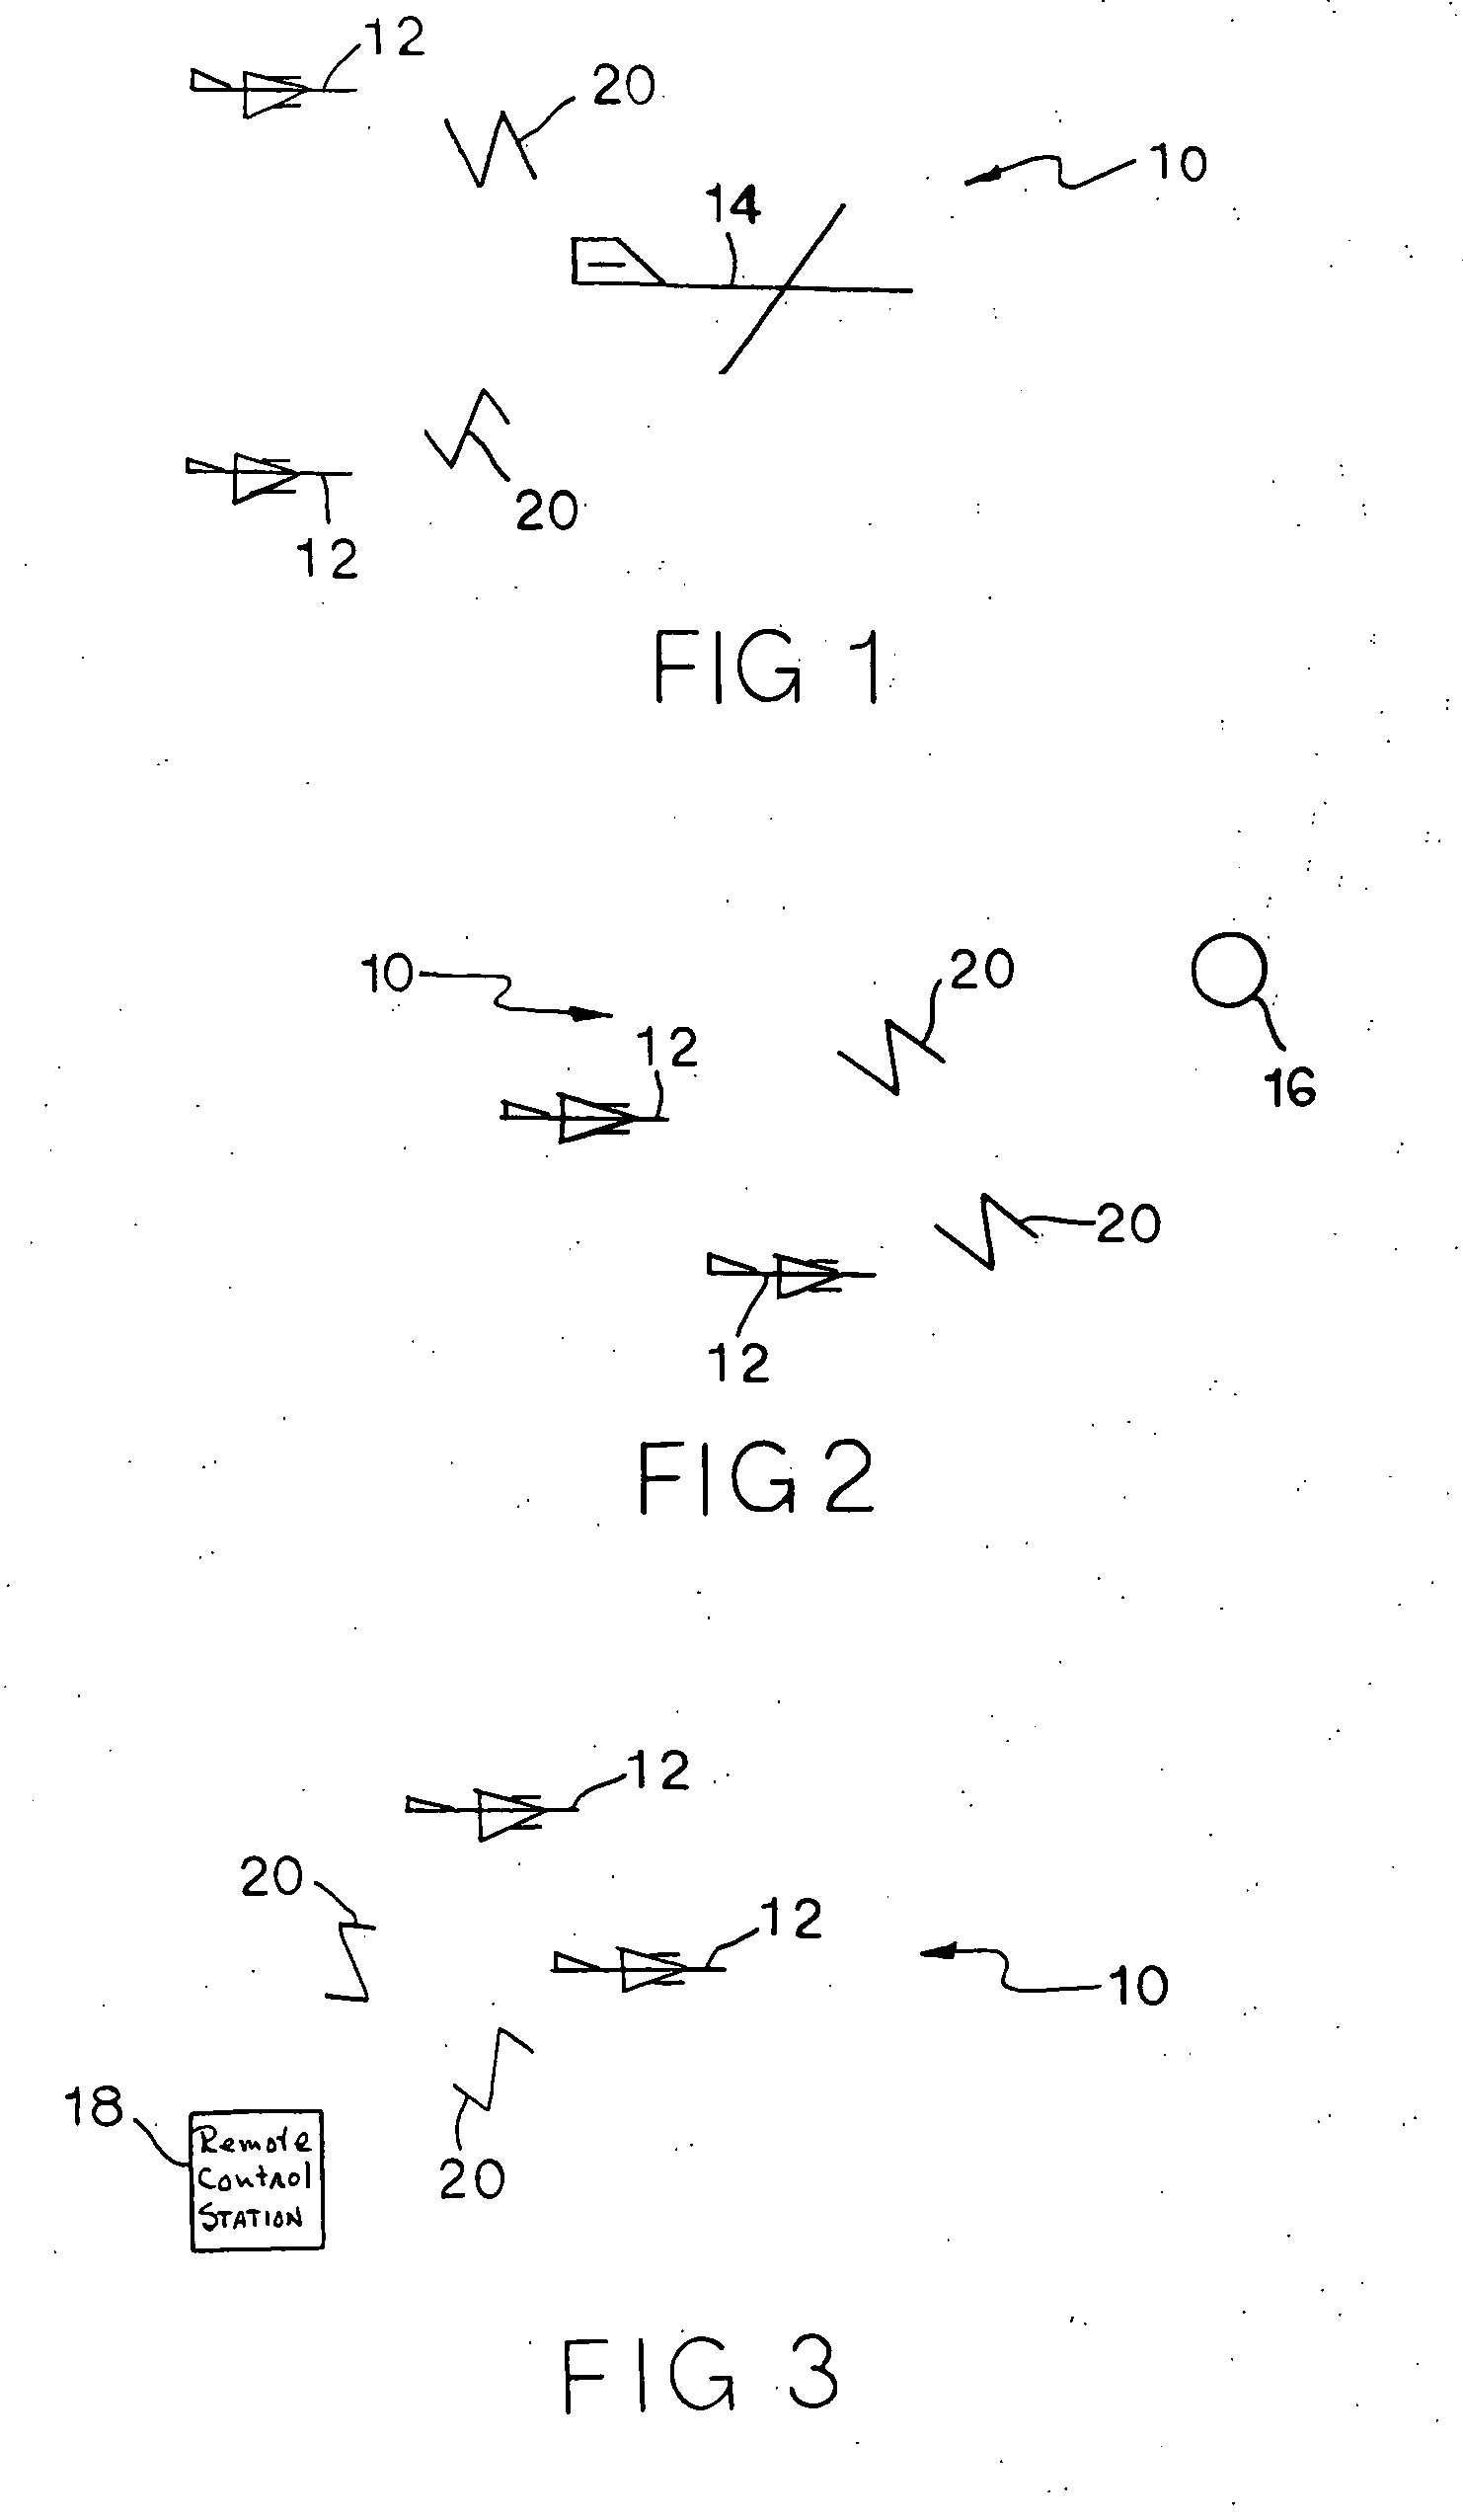 System and method for remote control of interdiction aircraft